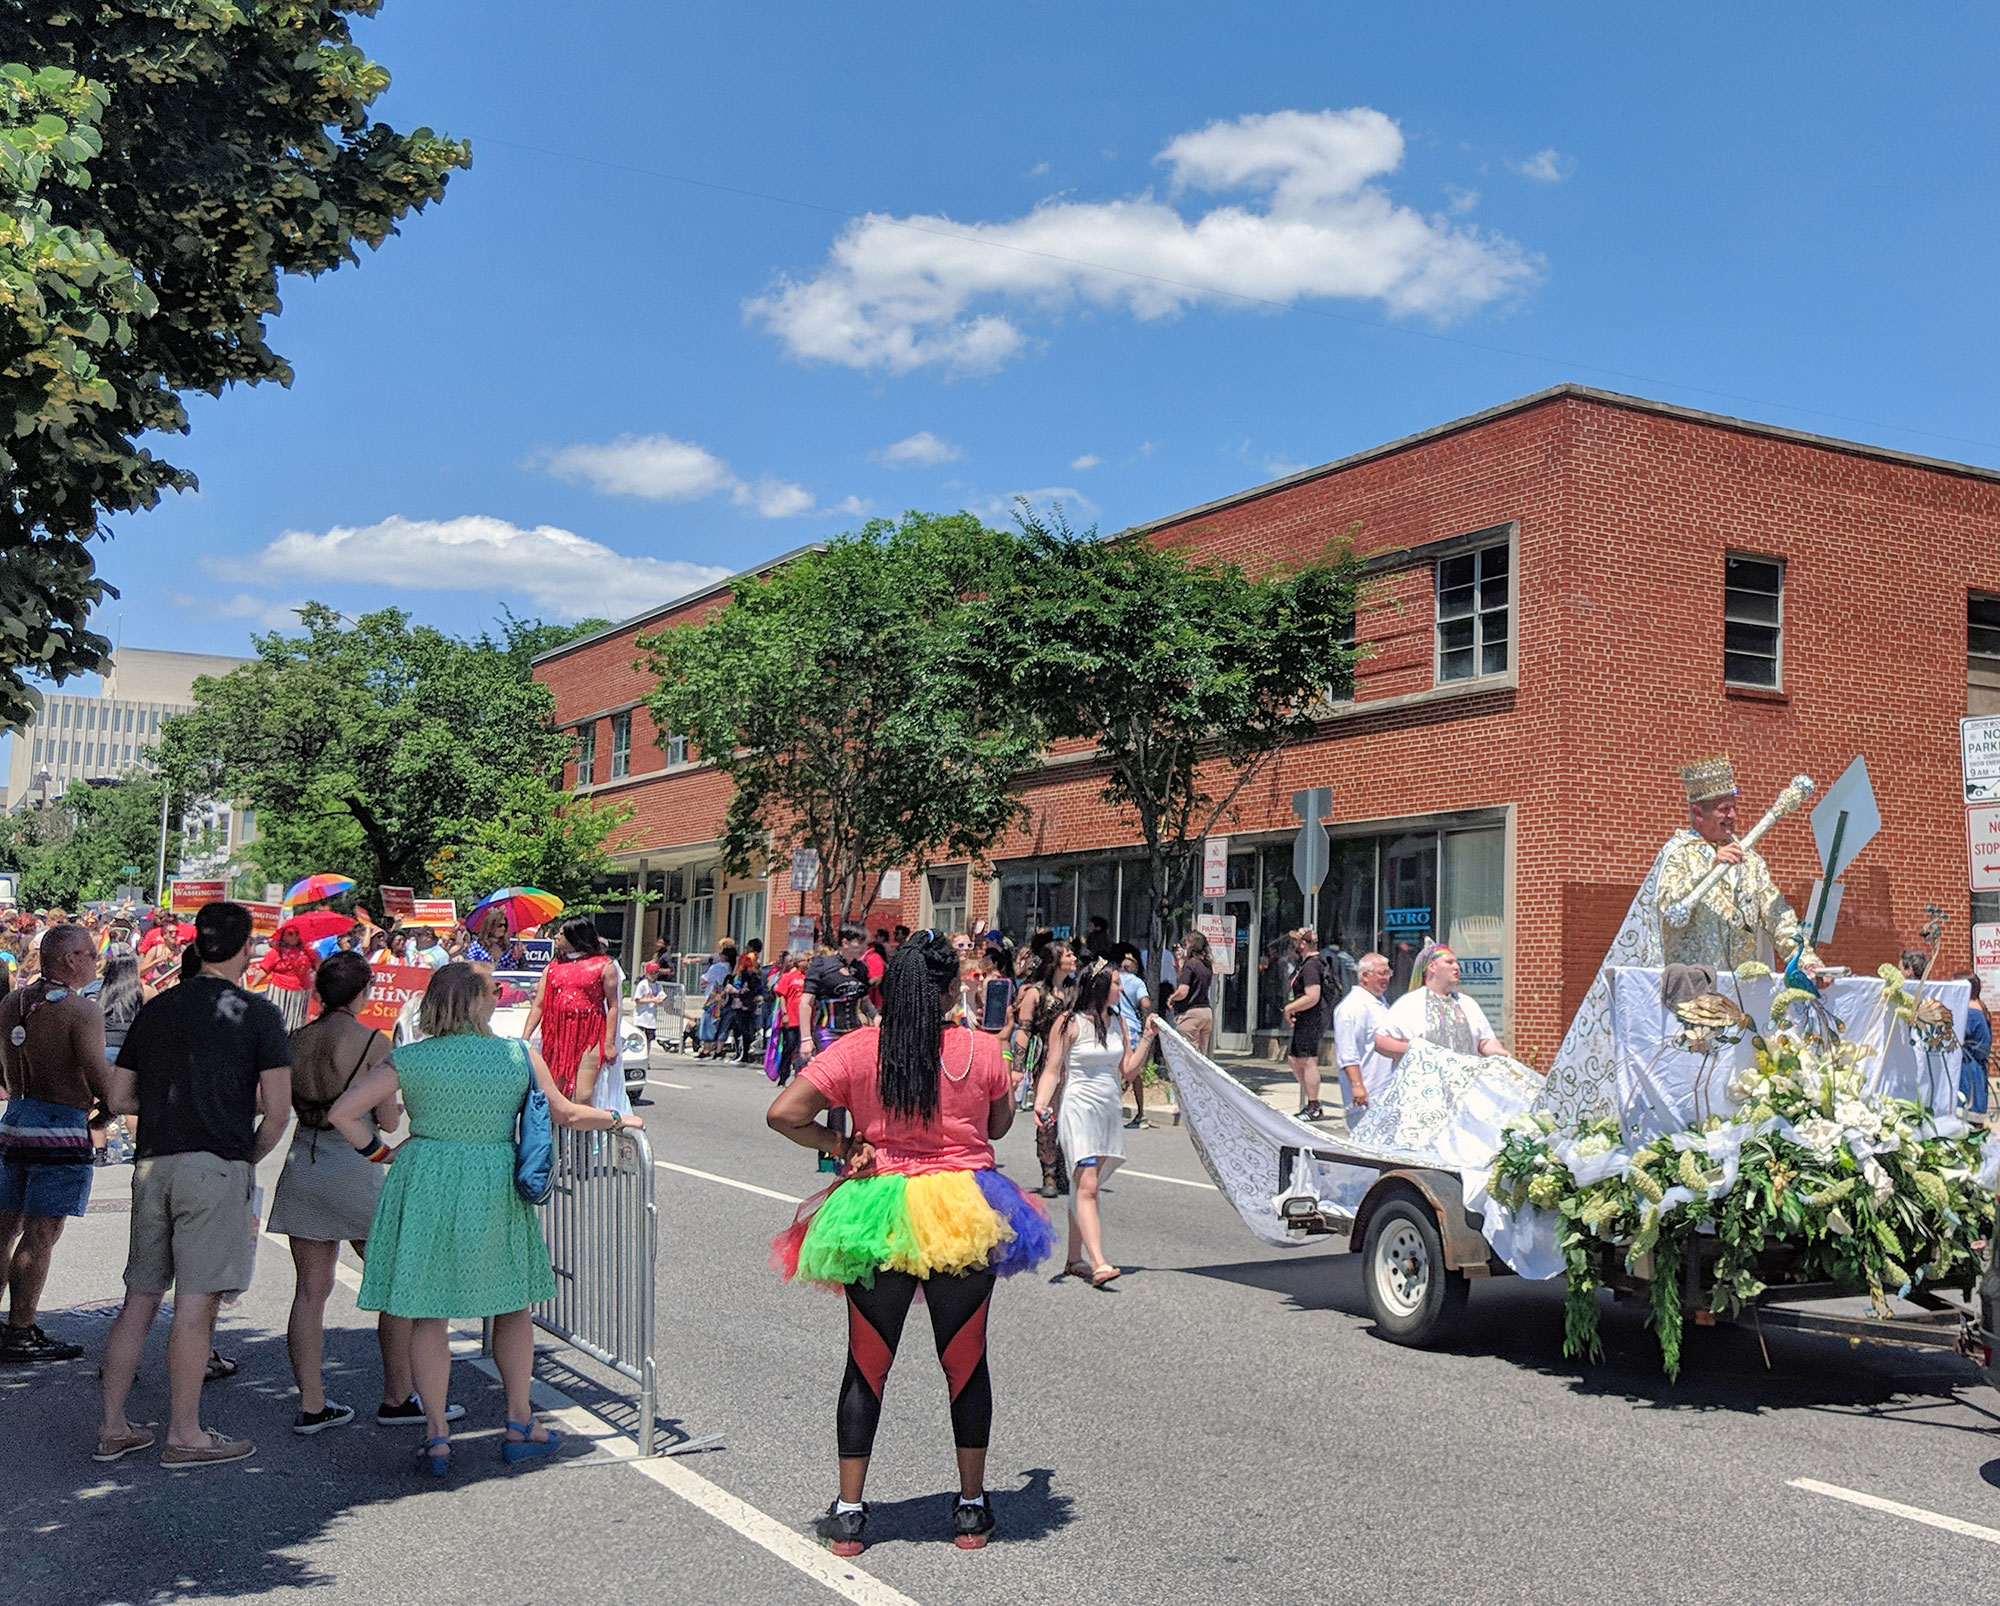 A Pope-lookalike in the Baltimore pride parade.